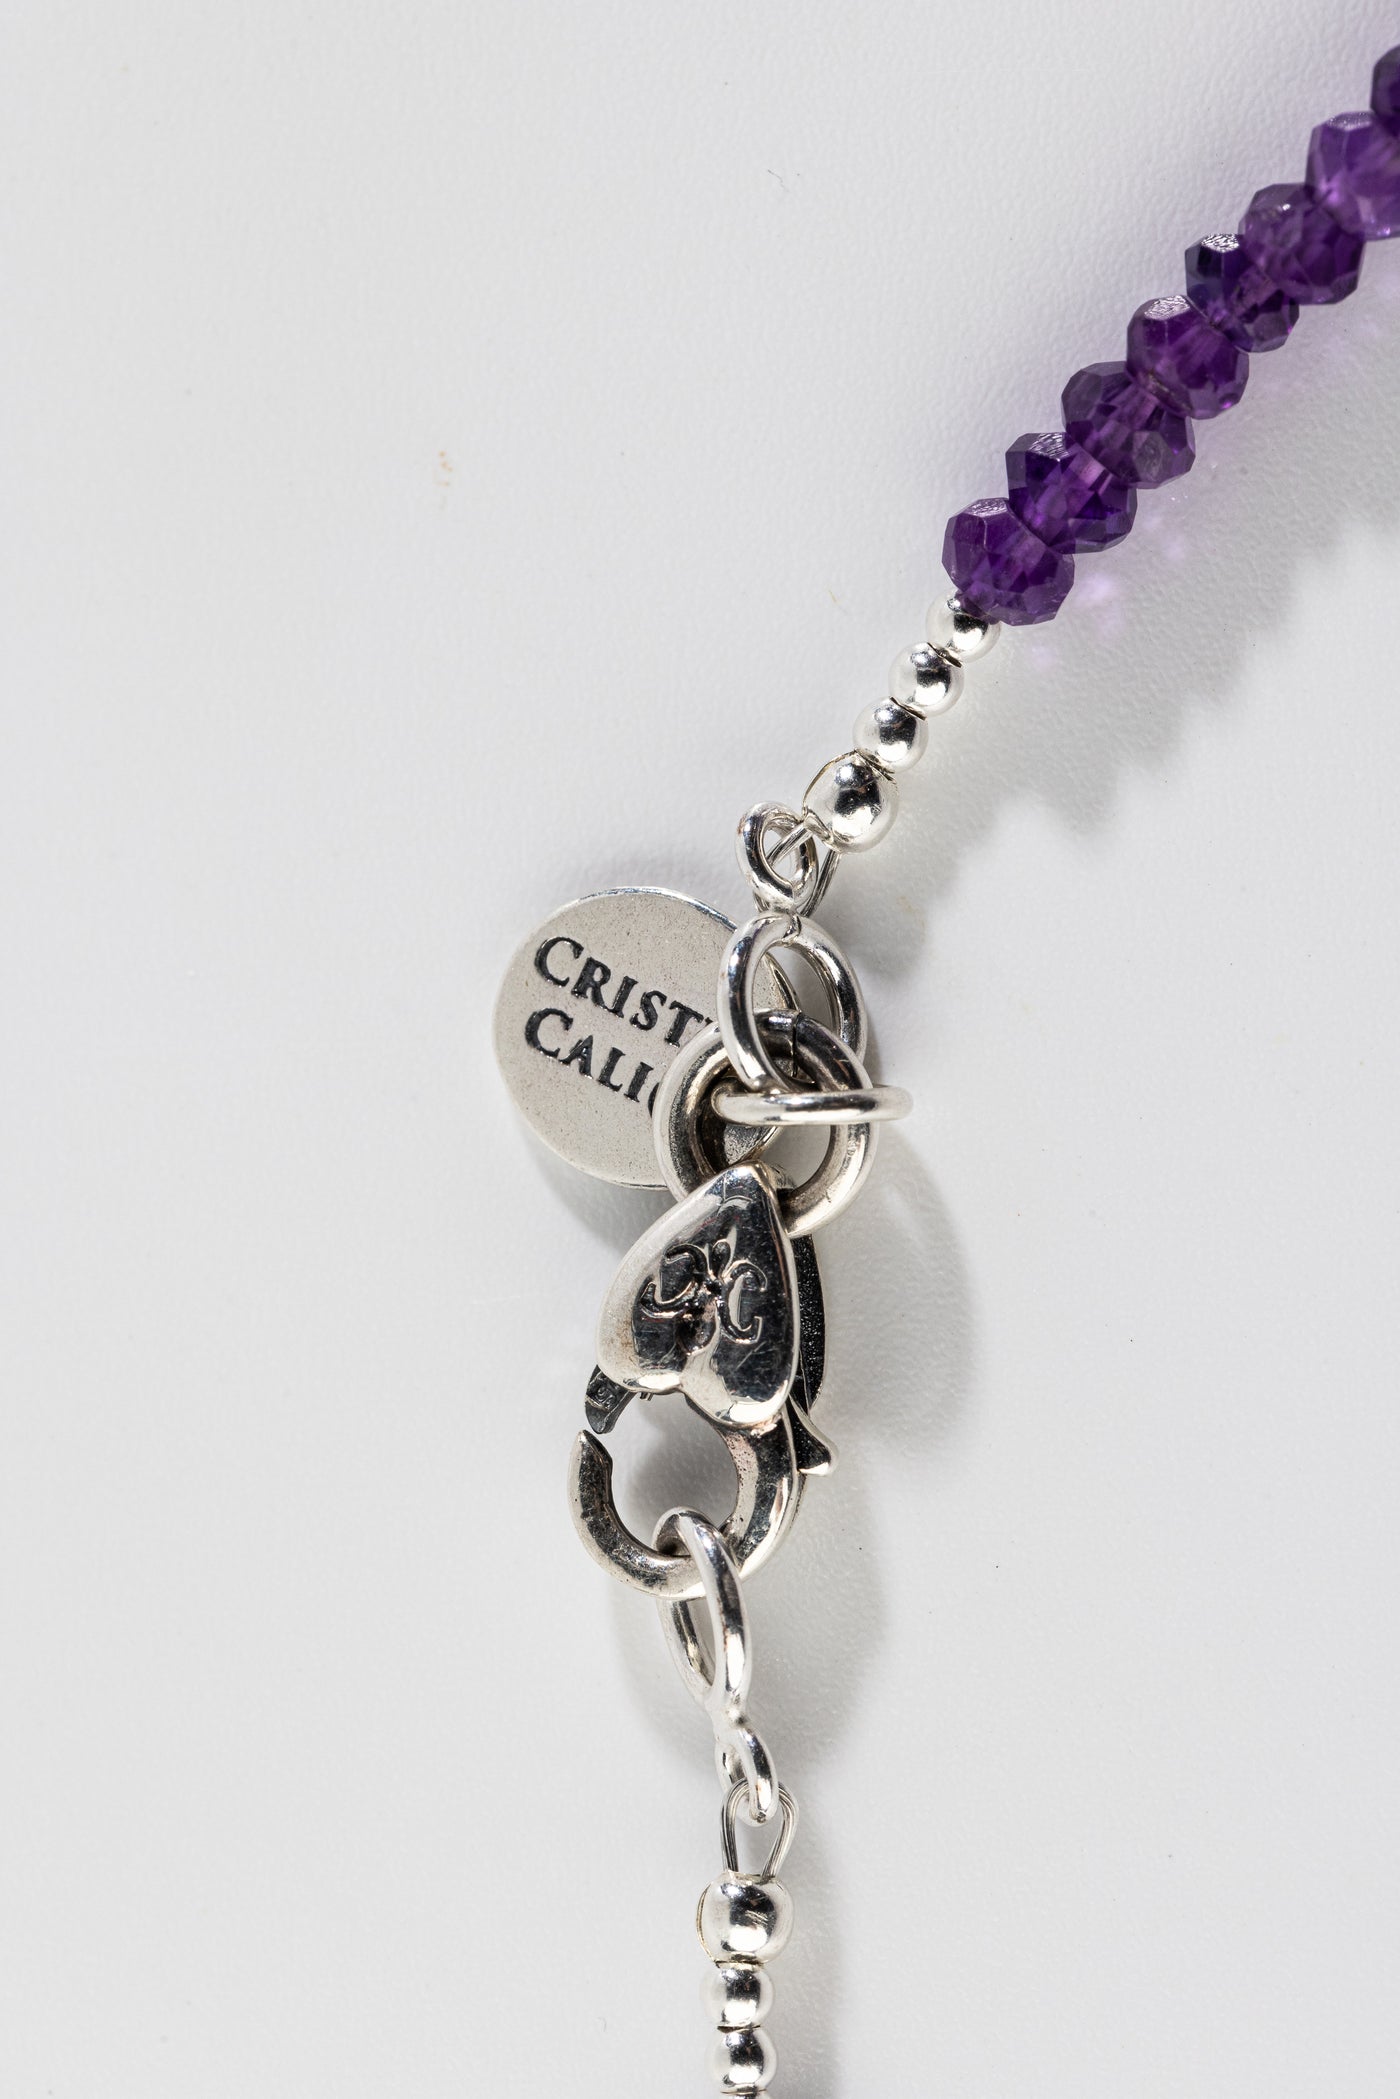 Amethyst POWER Signature Necklace